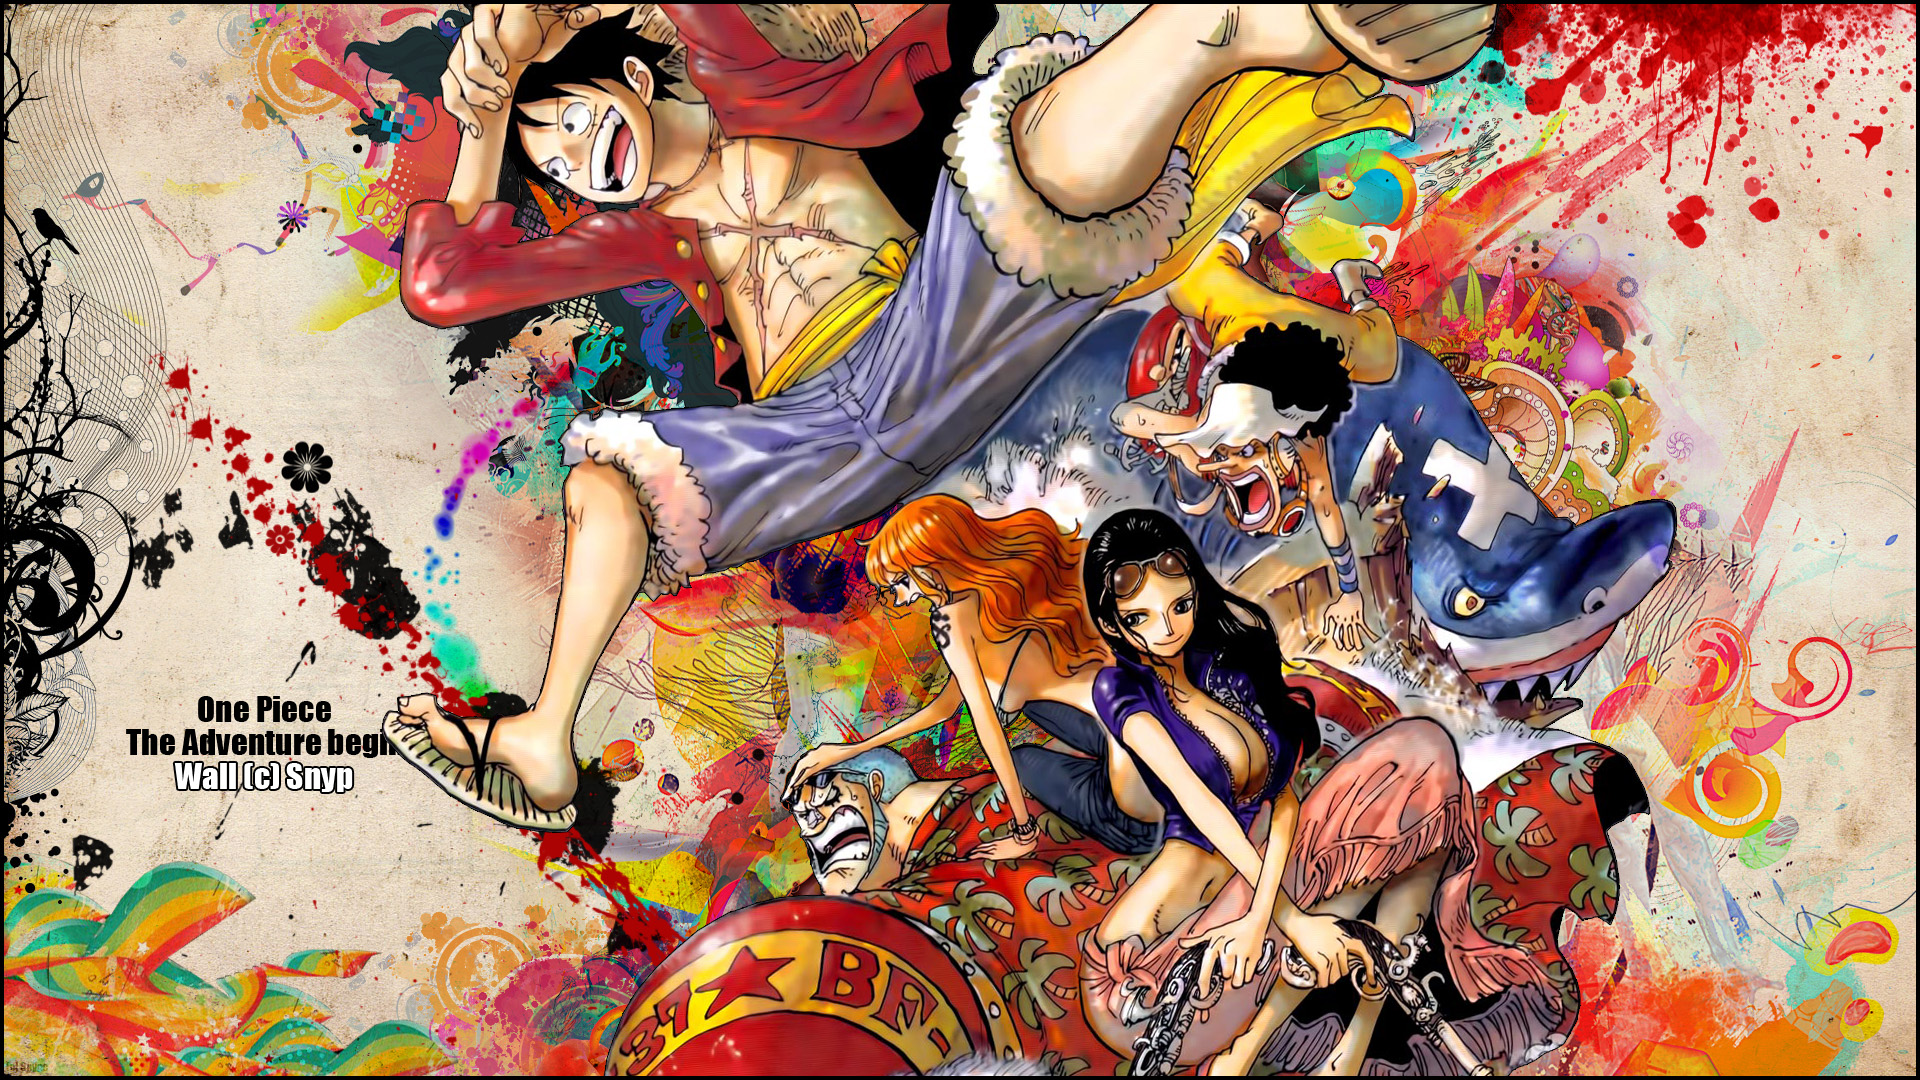 One Piece Background Desktop | Wallpapers, Backgrounds, Images ...